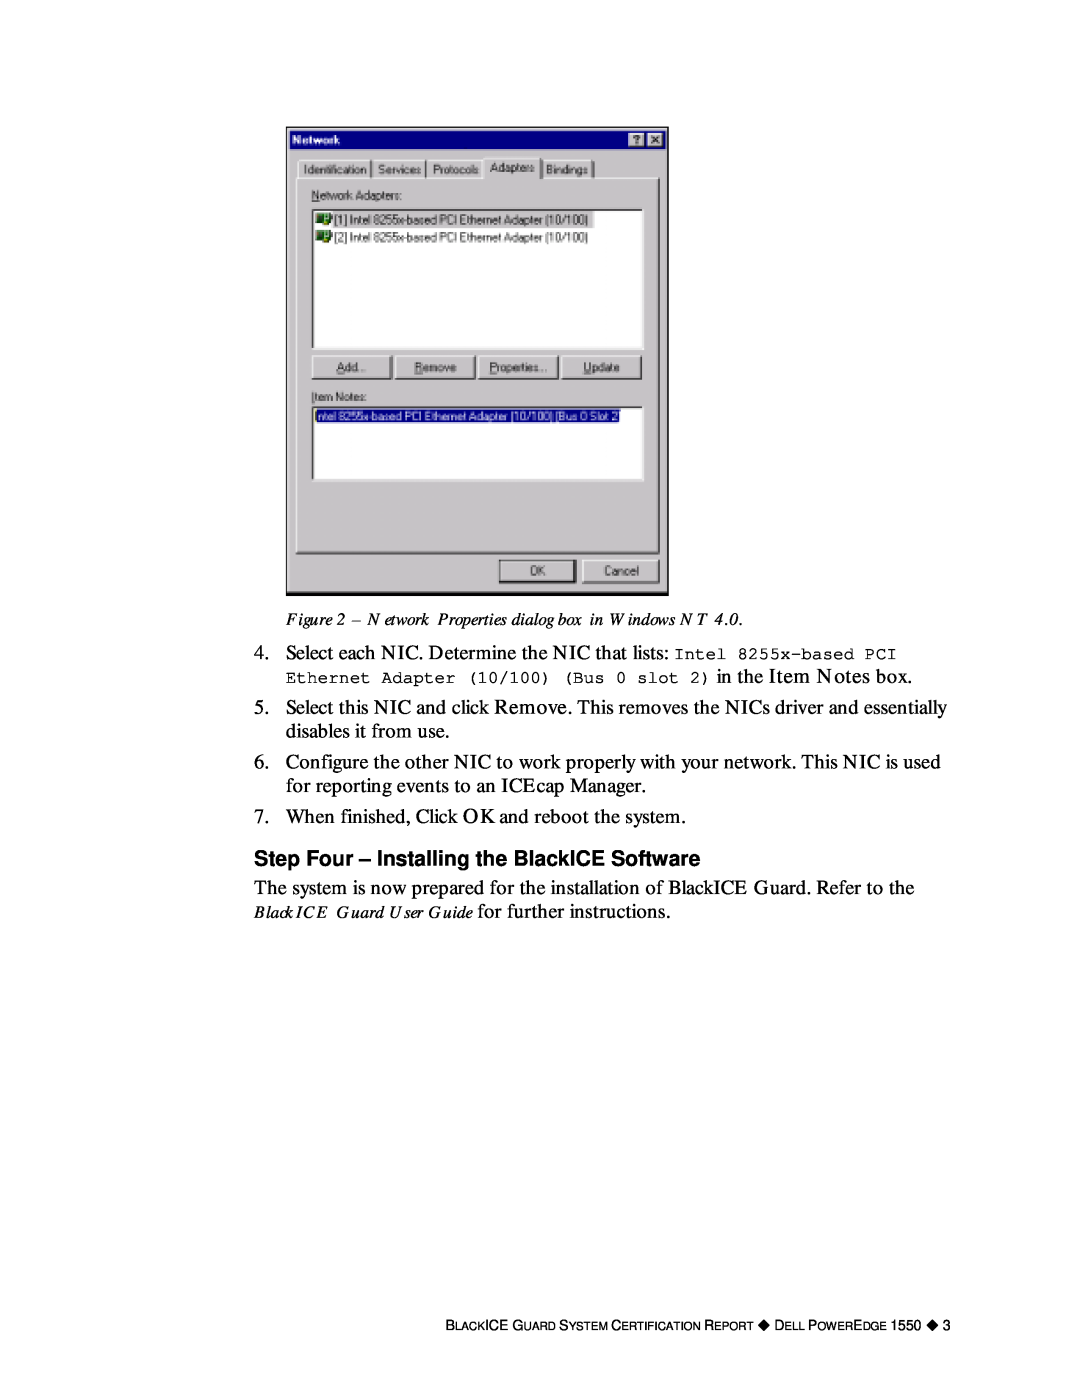 Dell 1550 manual Network Properties dialog box in Windows NT, Step Four - Installing the BlackICE Software 